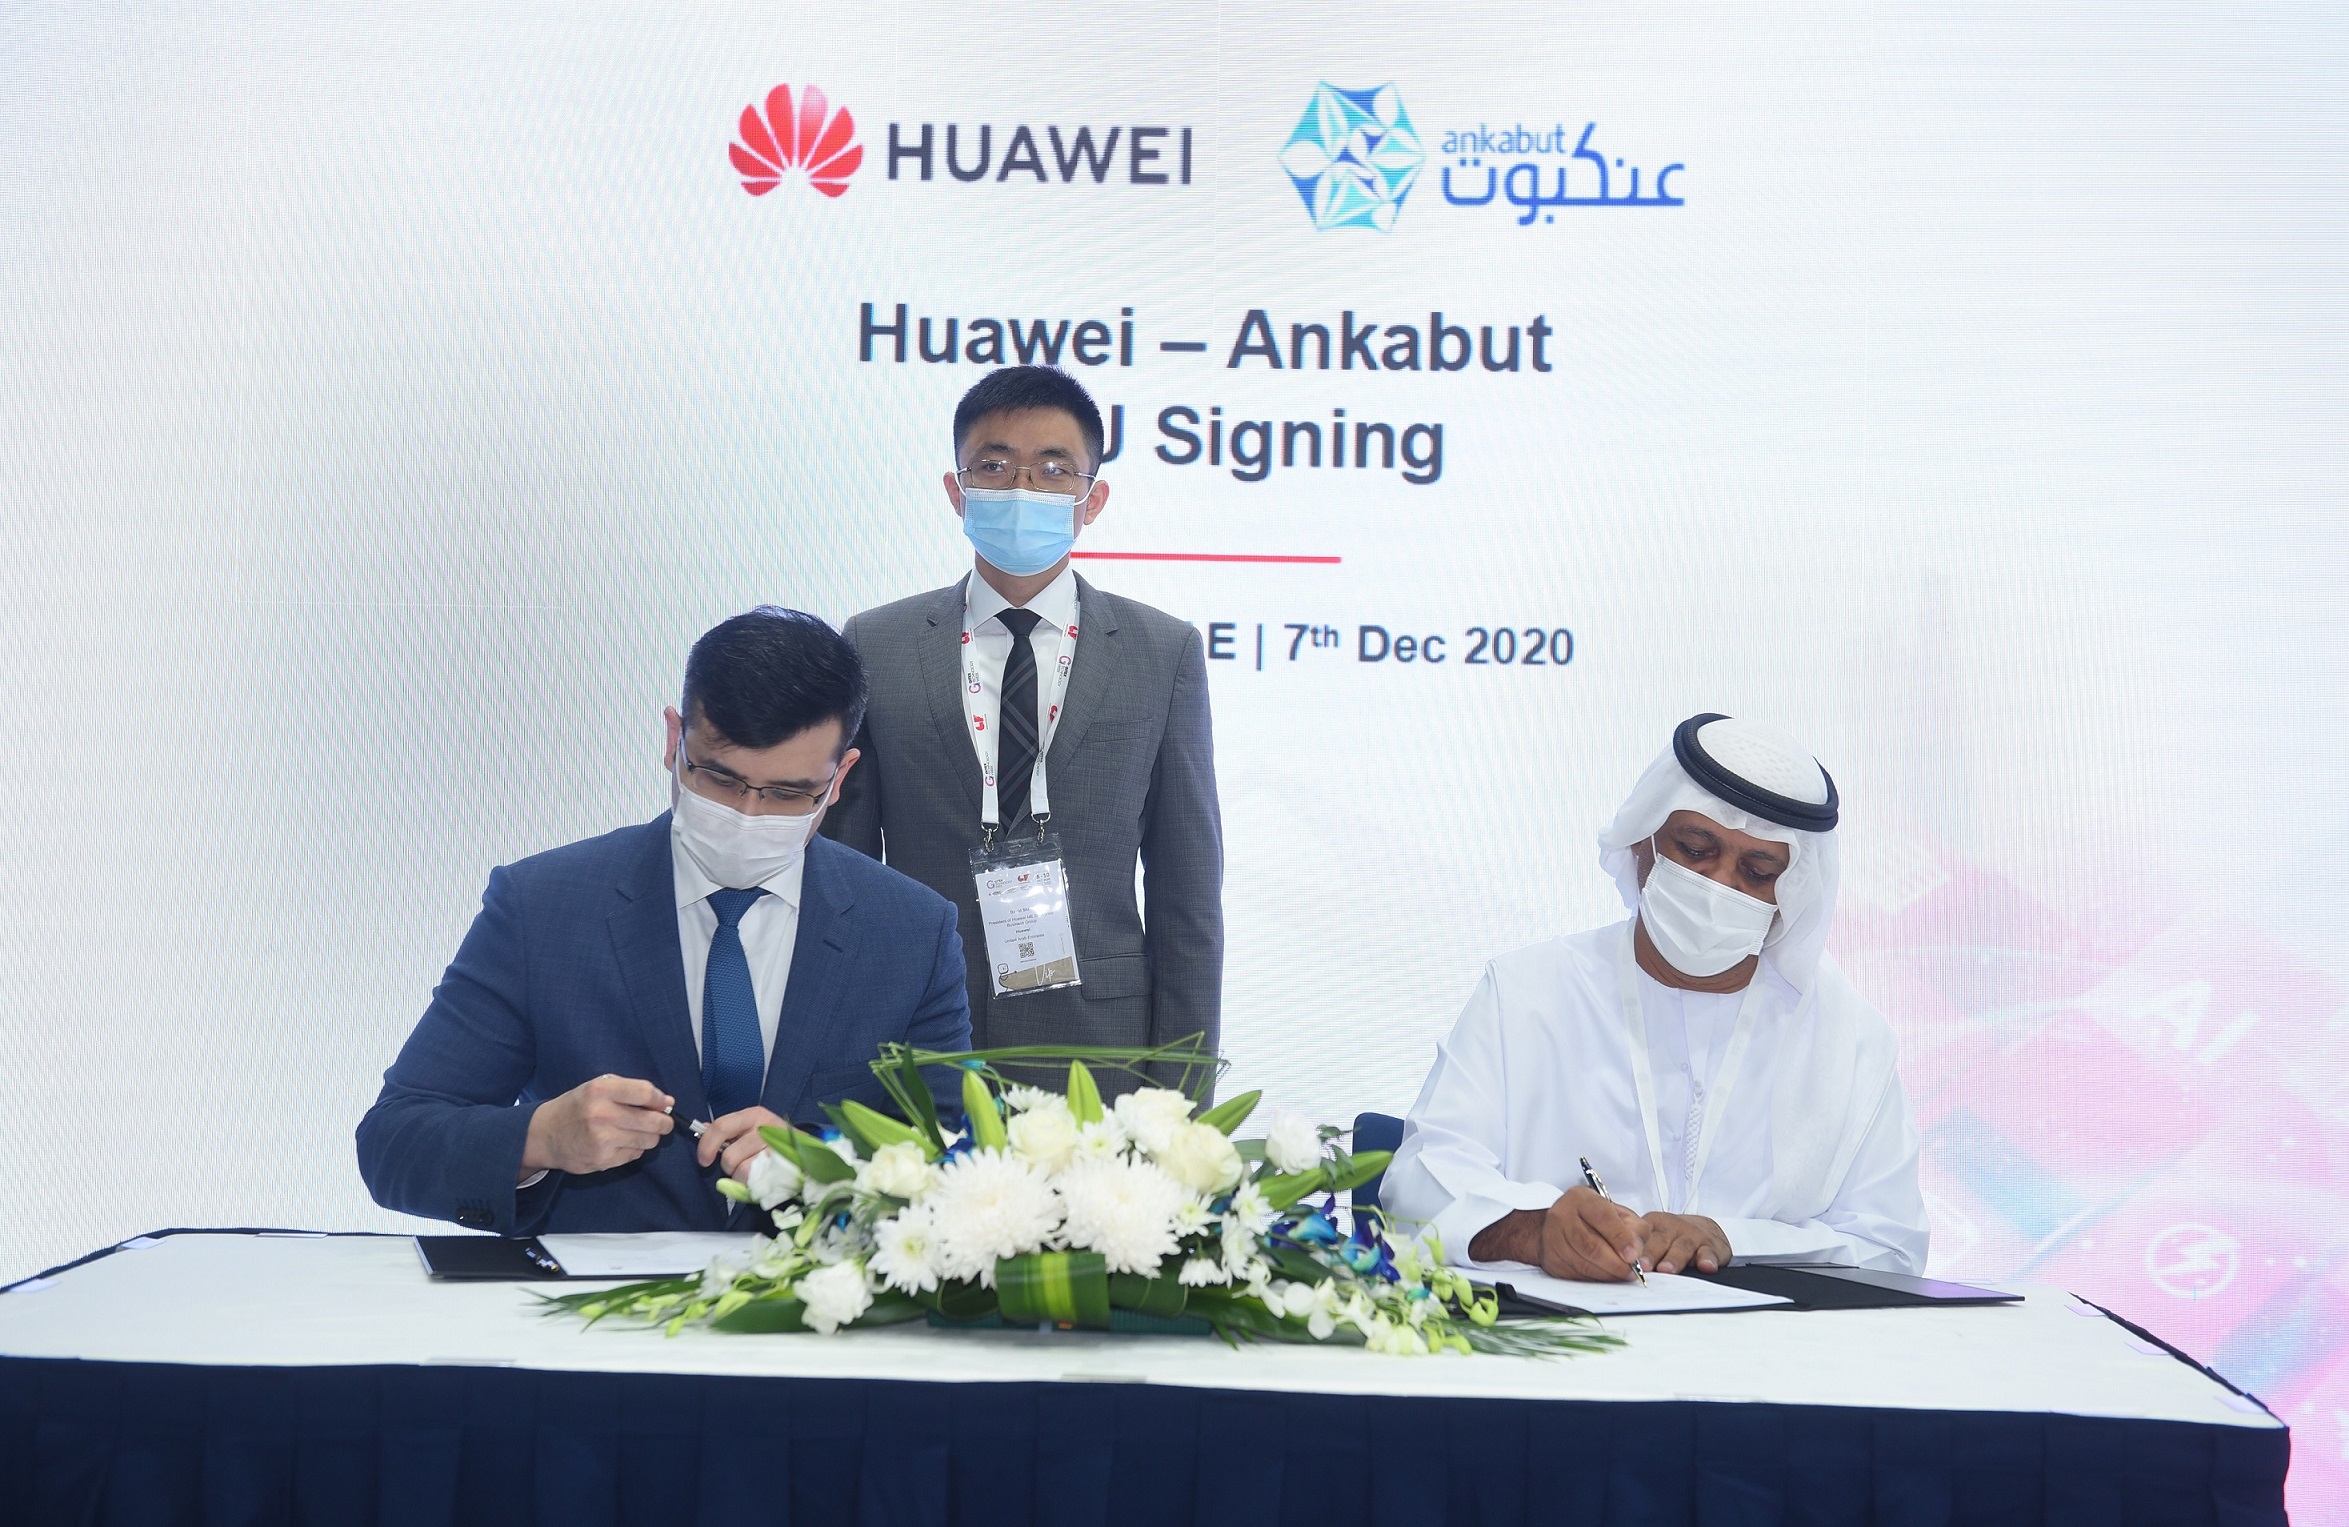 Ankabut partners with Huawei for cloud & software defined data center expansion project